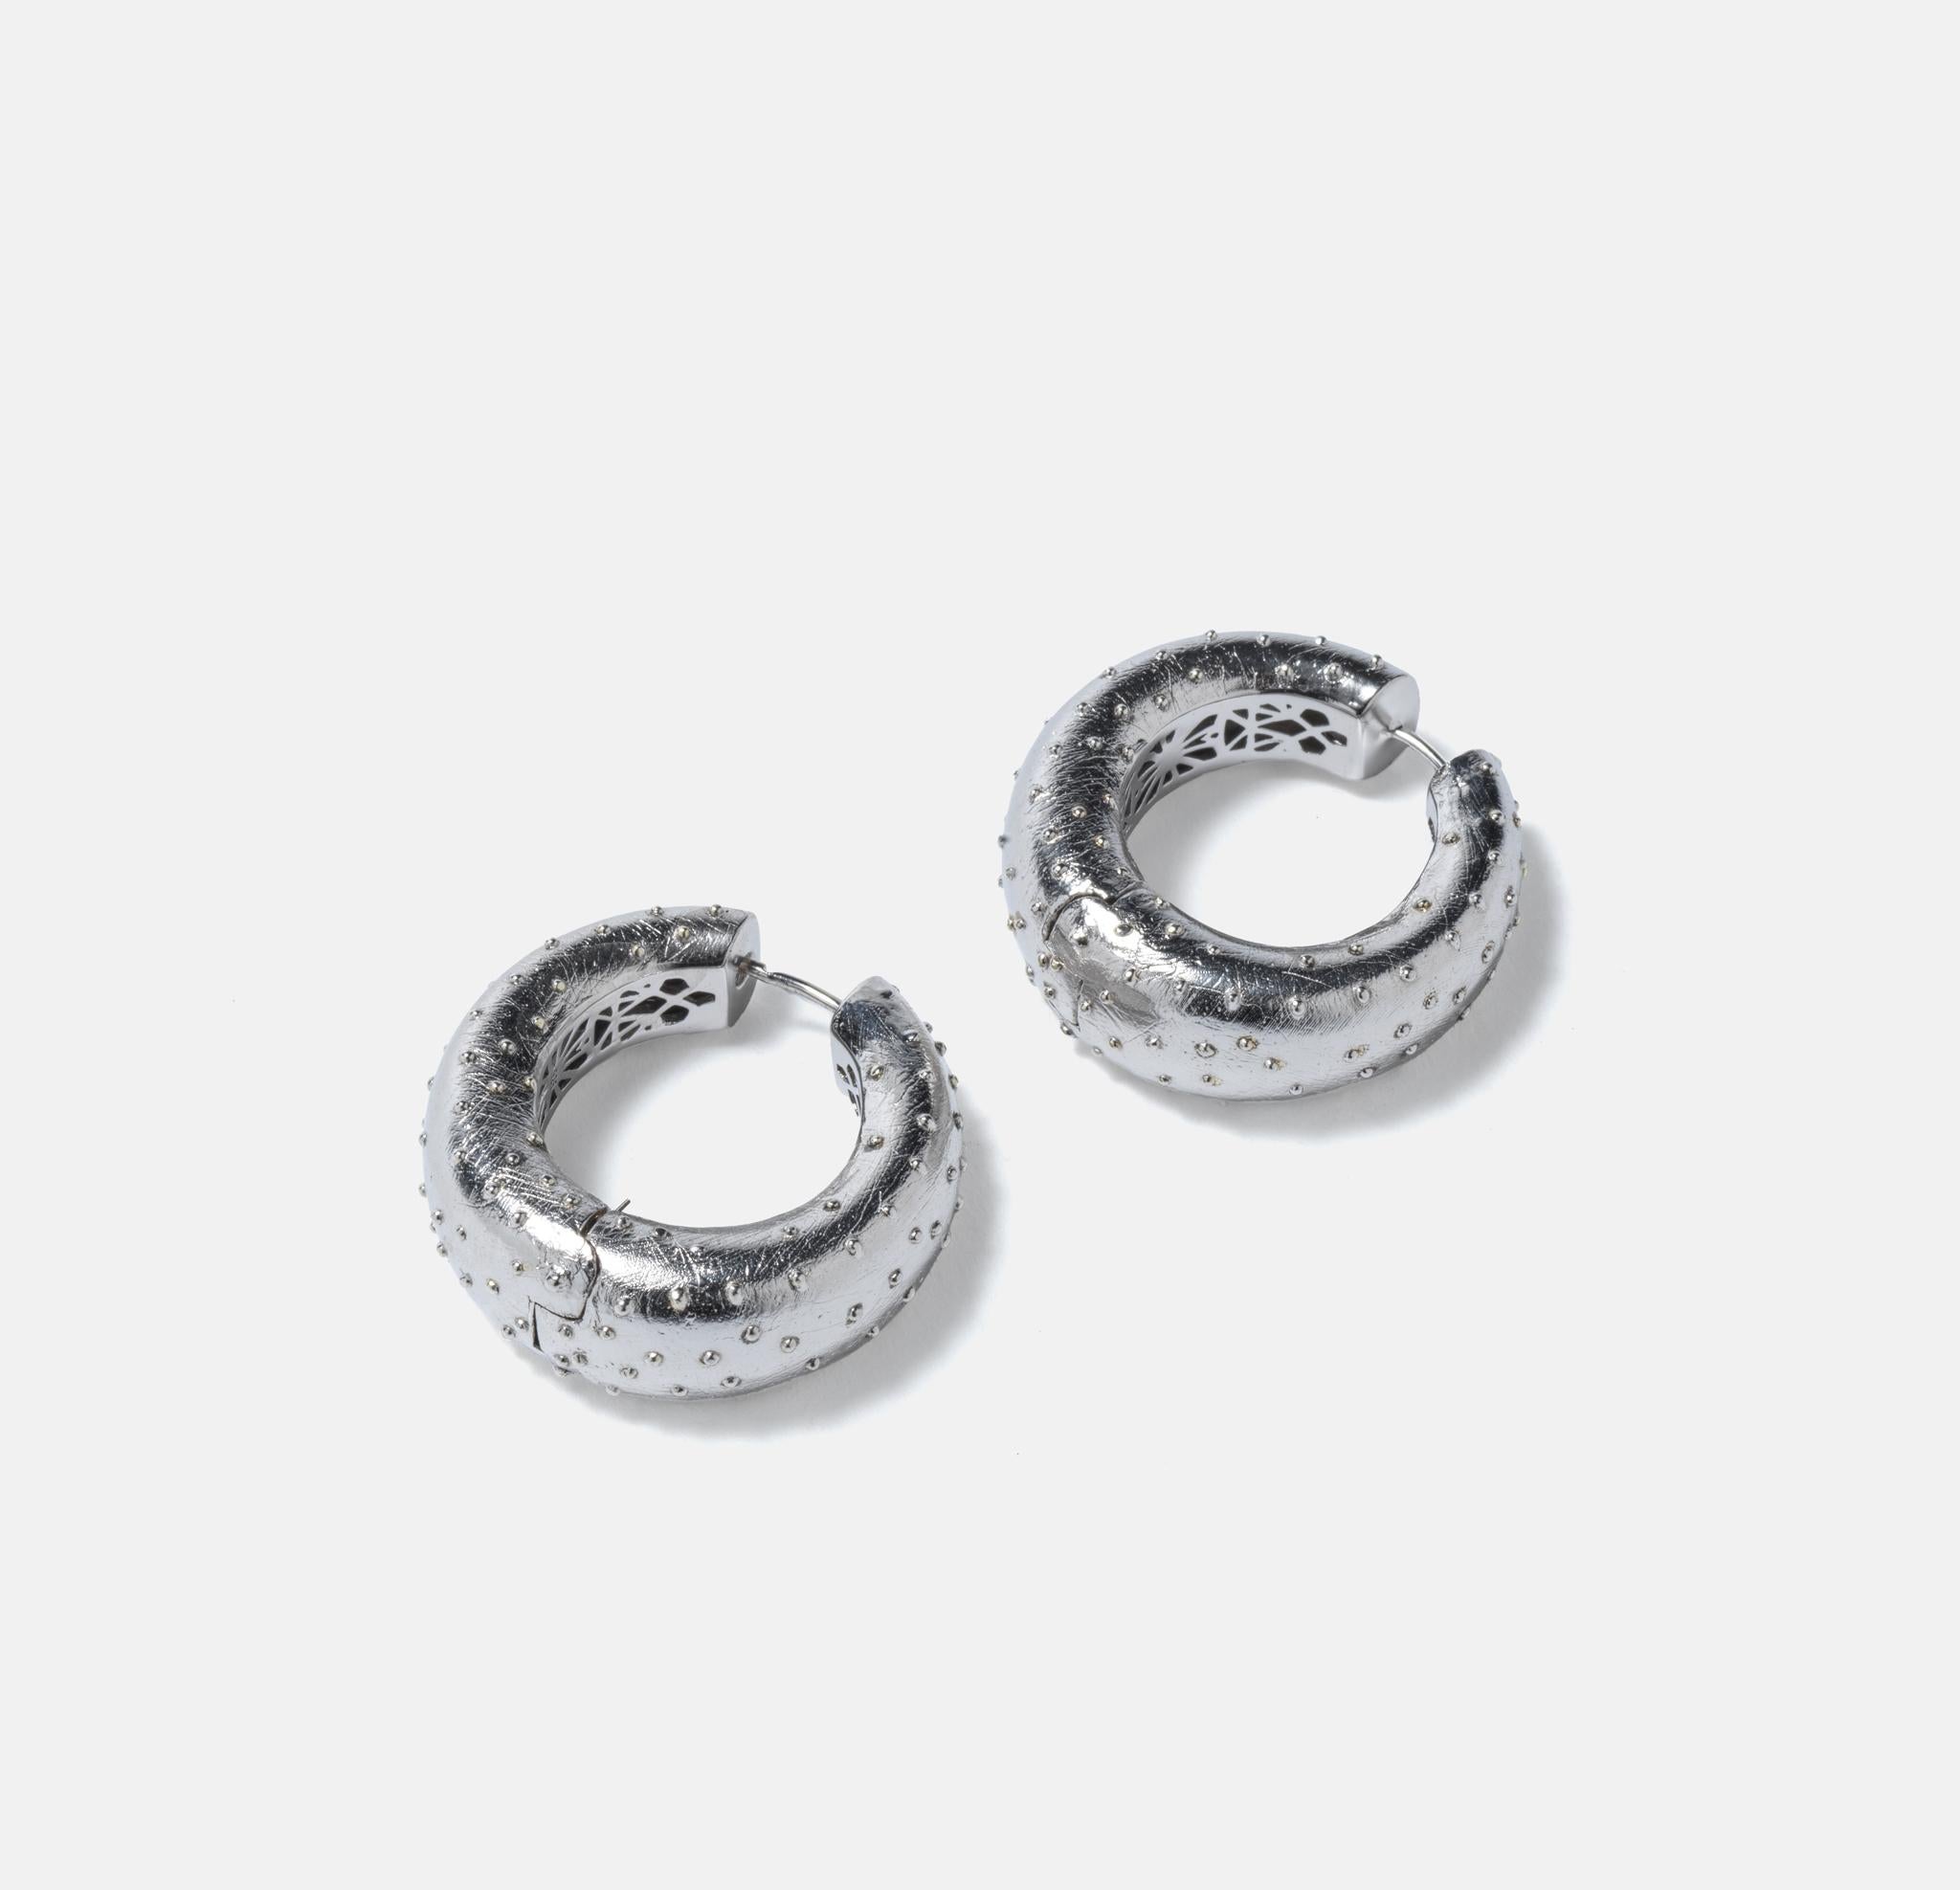 These ear rings called Osiris designed by Swedish designer and silversmith Paula Pantolin are made of silver with a design that is meant look like ostrich skin. They are quite large in size and have heavy feeling to them. They look like RocknRoll.

